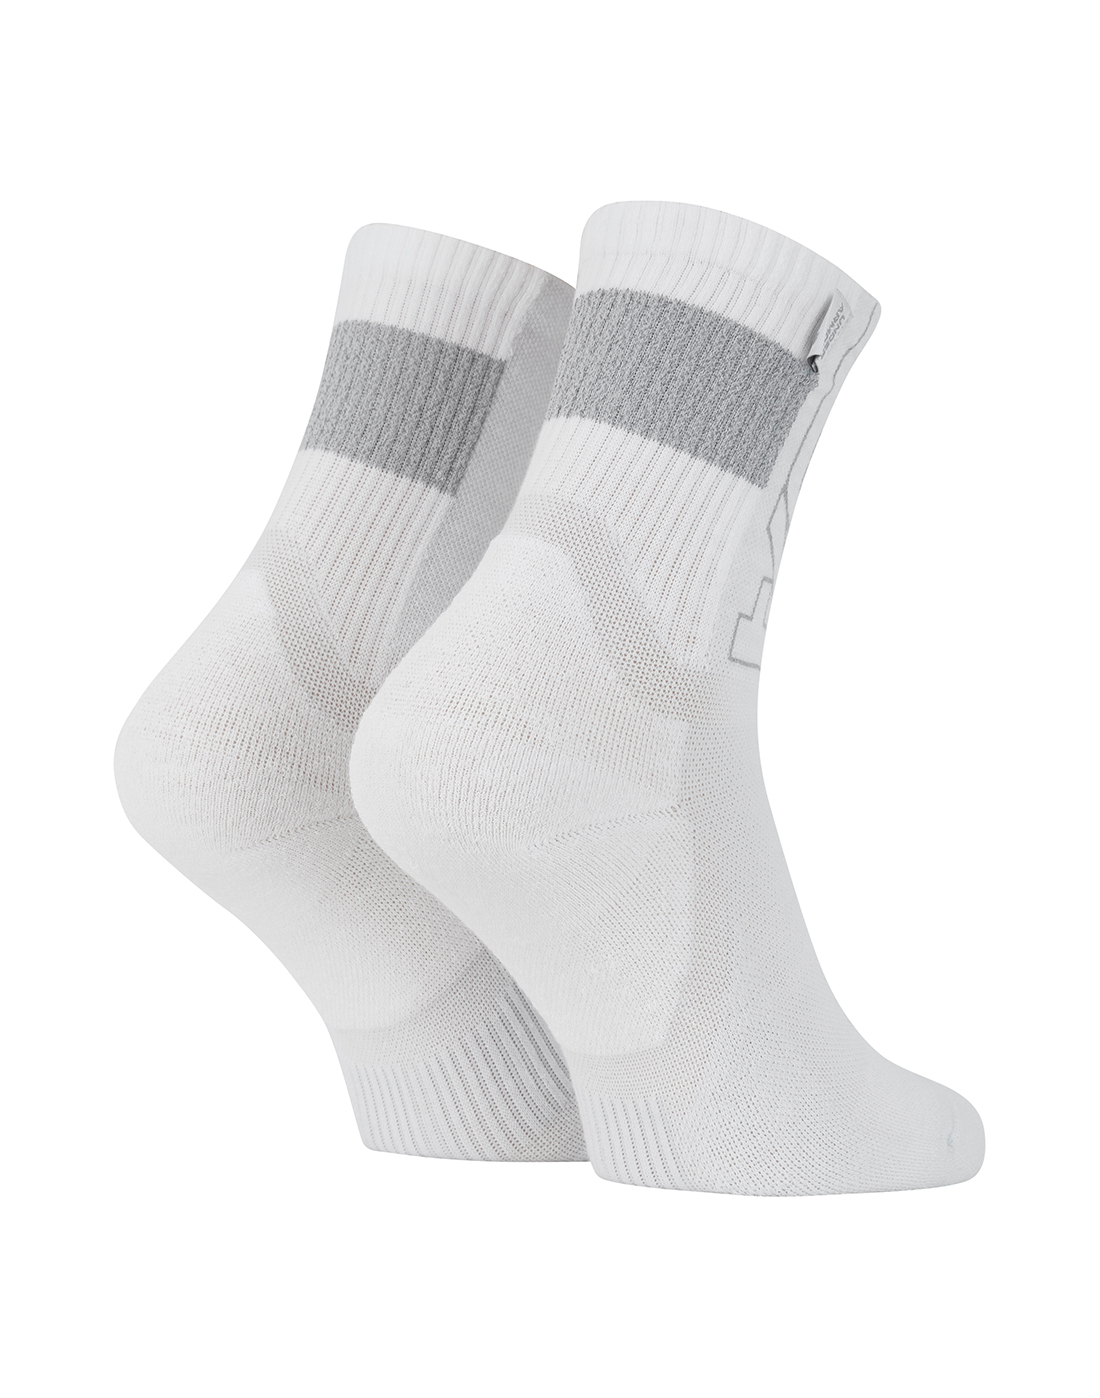 Under Armour ArmourDry Run Crew Socks - White | Life Style Sports IE